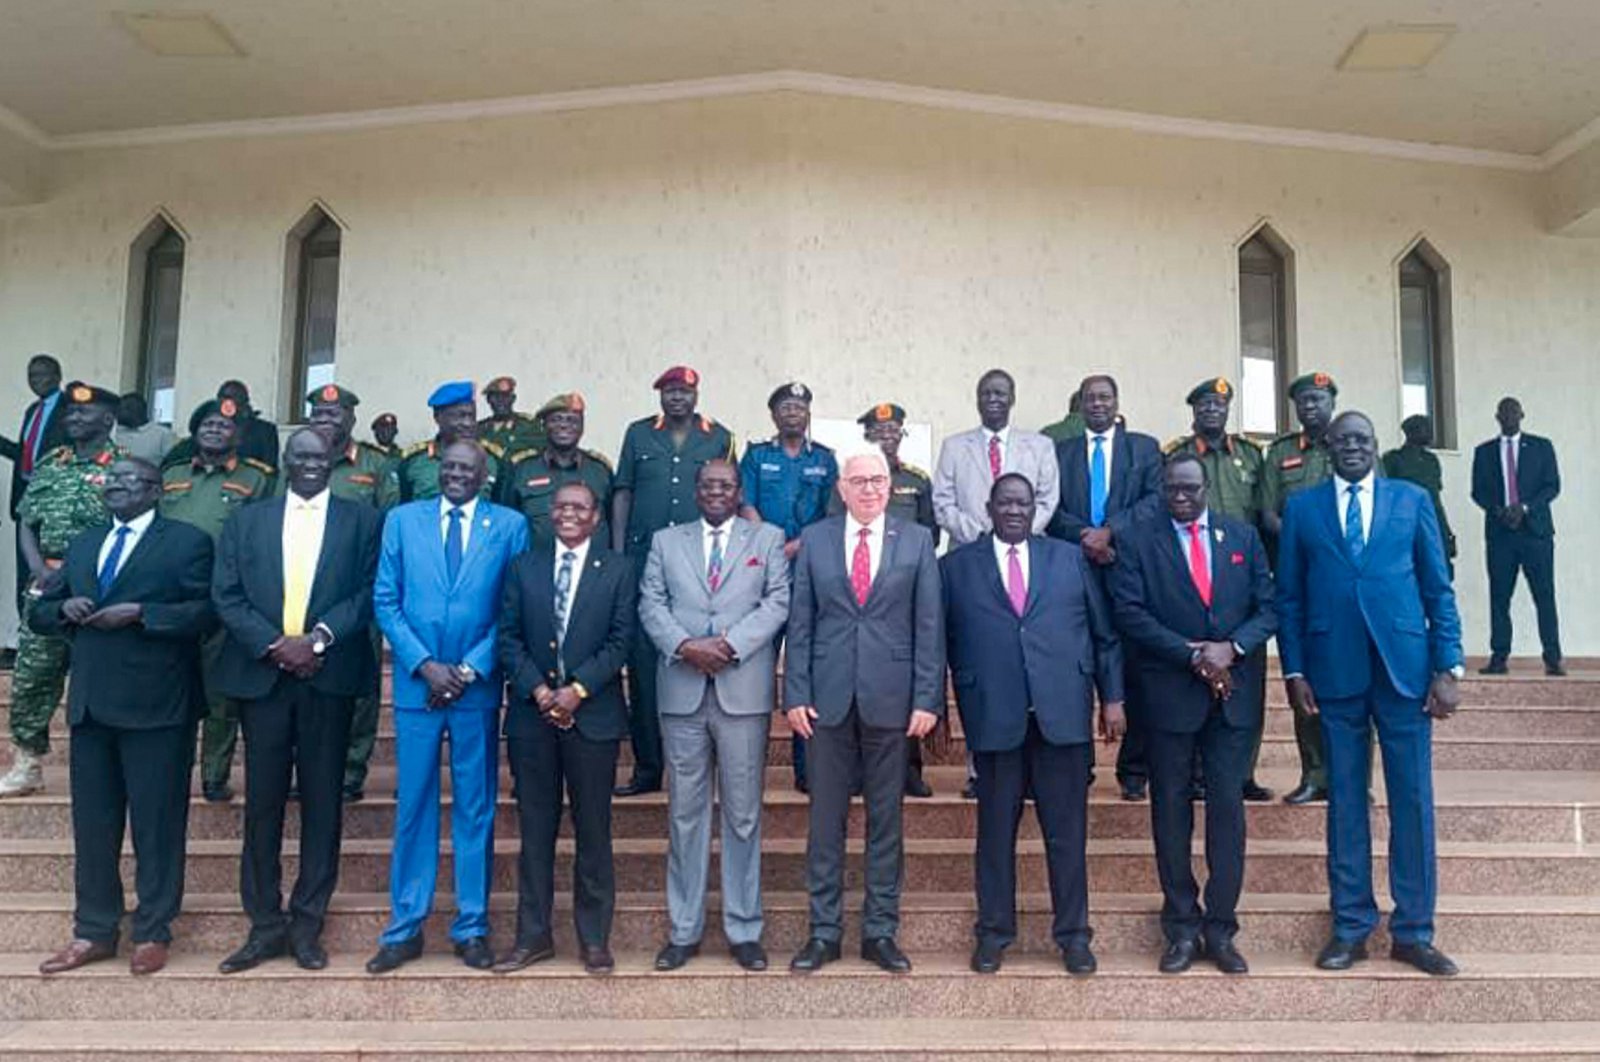 Turkish Ambassador to Juba Erdem Mutaf (C) poses with South Sudan officials at a ceremony for handover of uniforms, in Juba, South Sudan, Oct. 10, 2023. (AA Photo)